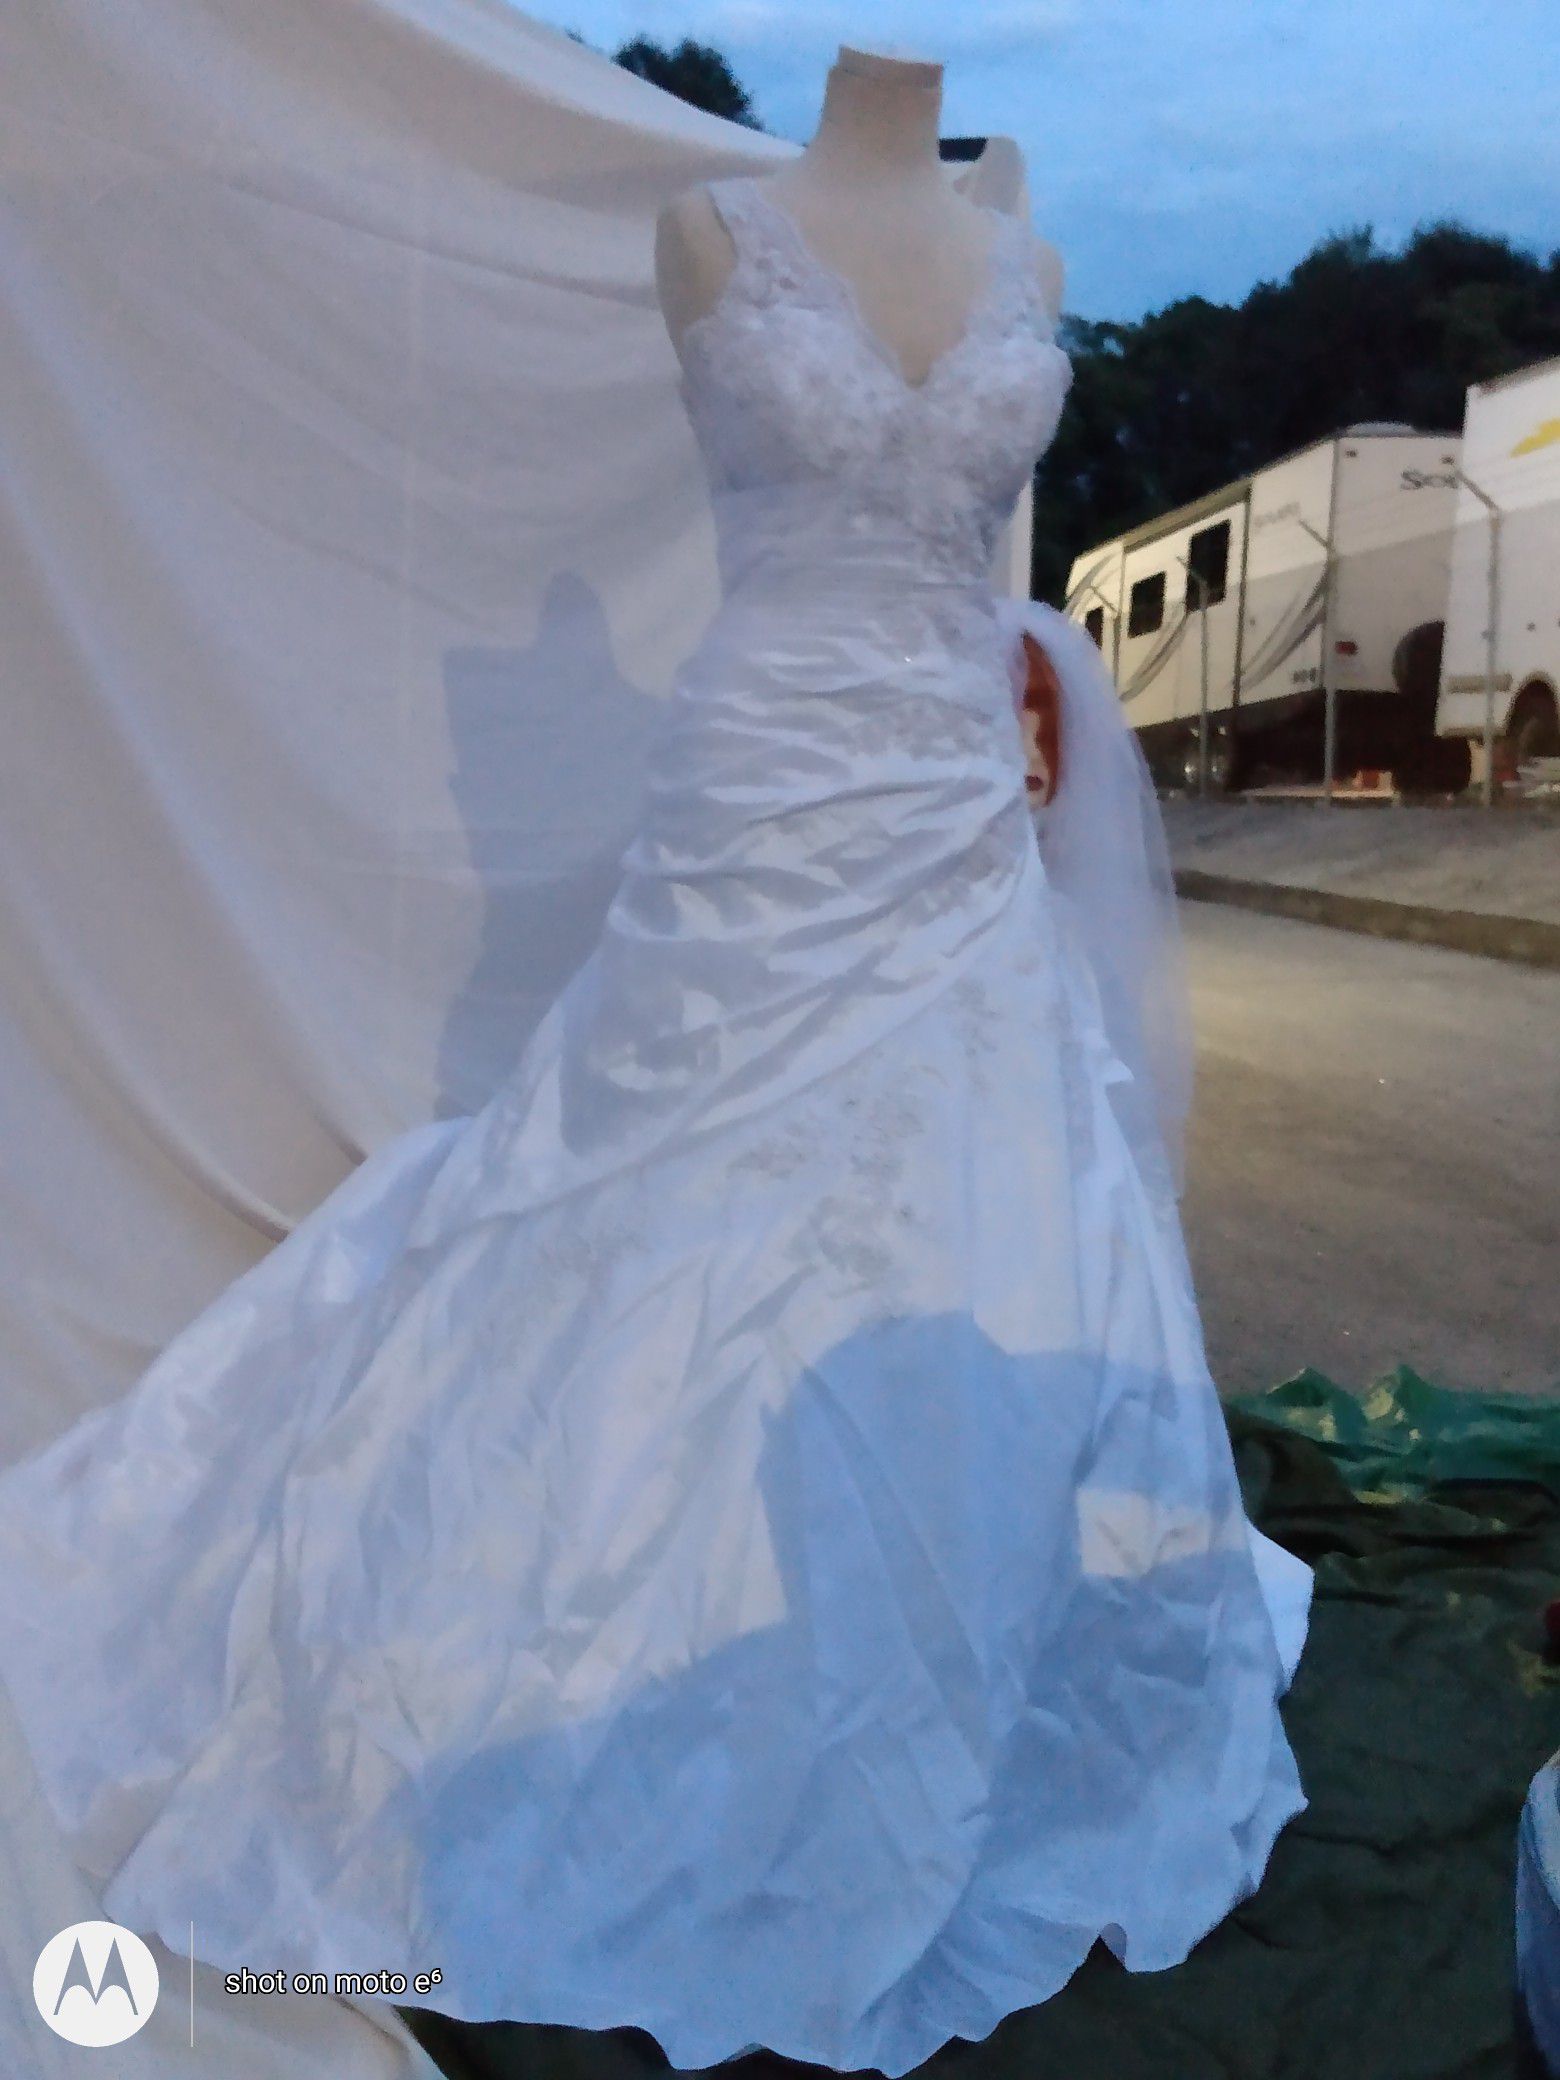 Re: Gorgeous Bridal Gown w/ Veil. Full, crinoline slip, stiched into the dress,, along w/ a 2cd, half slip of added crinoline.